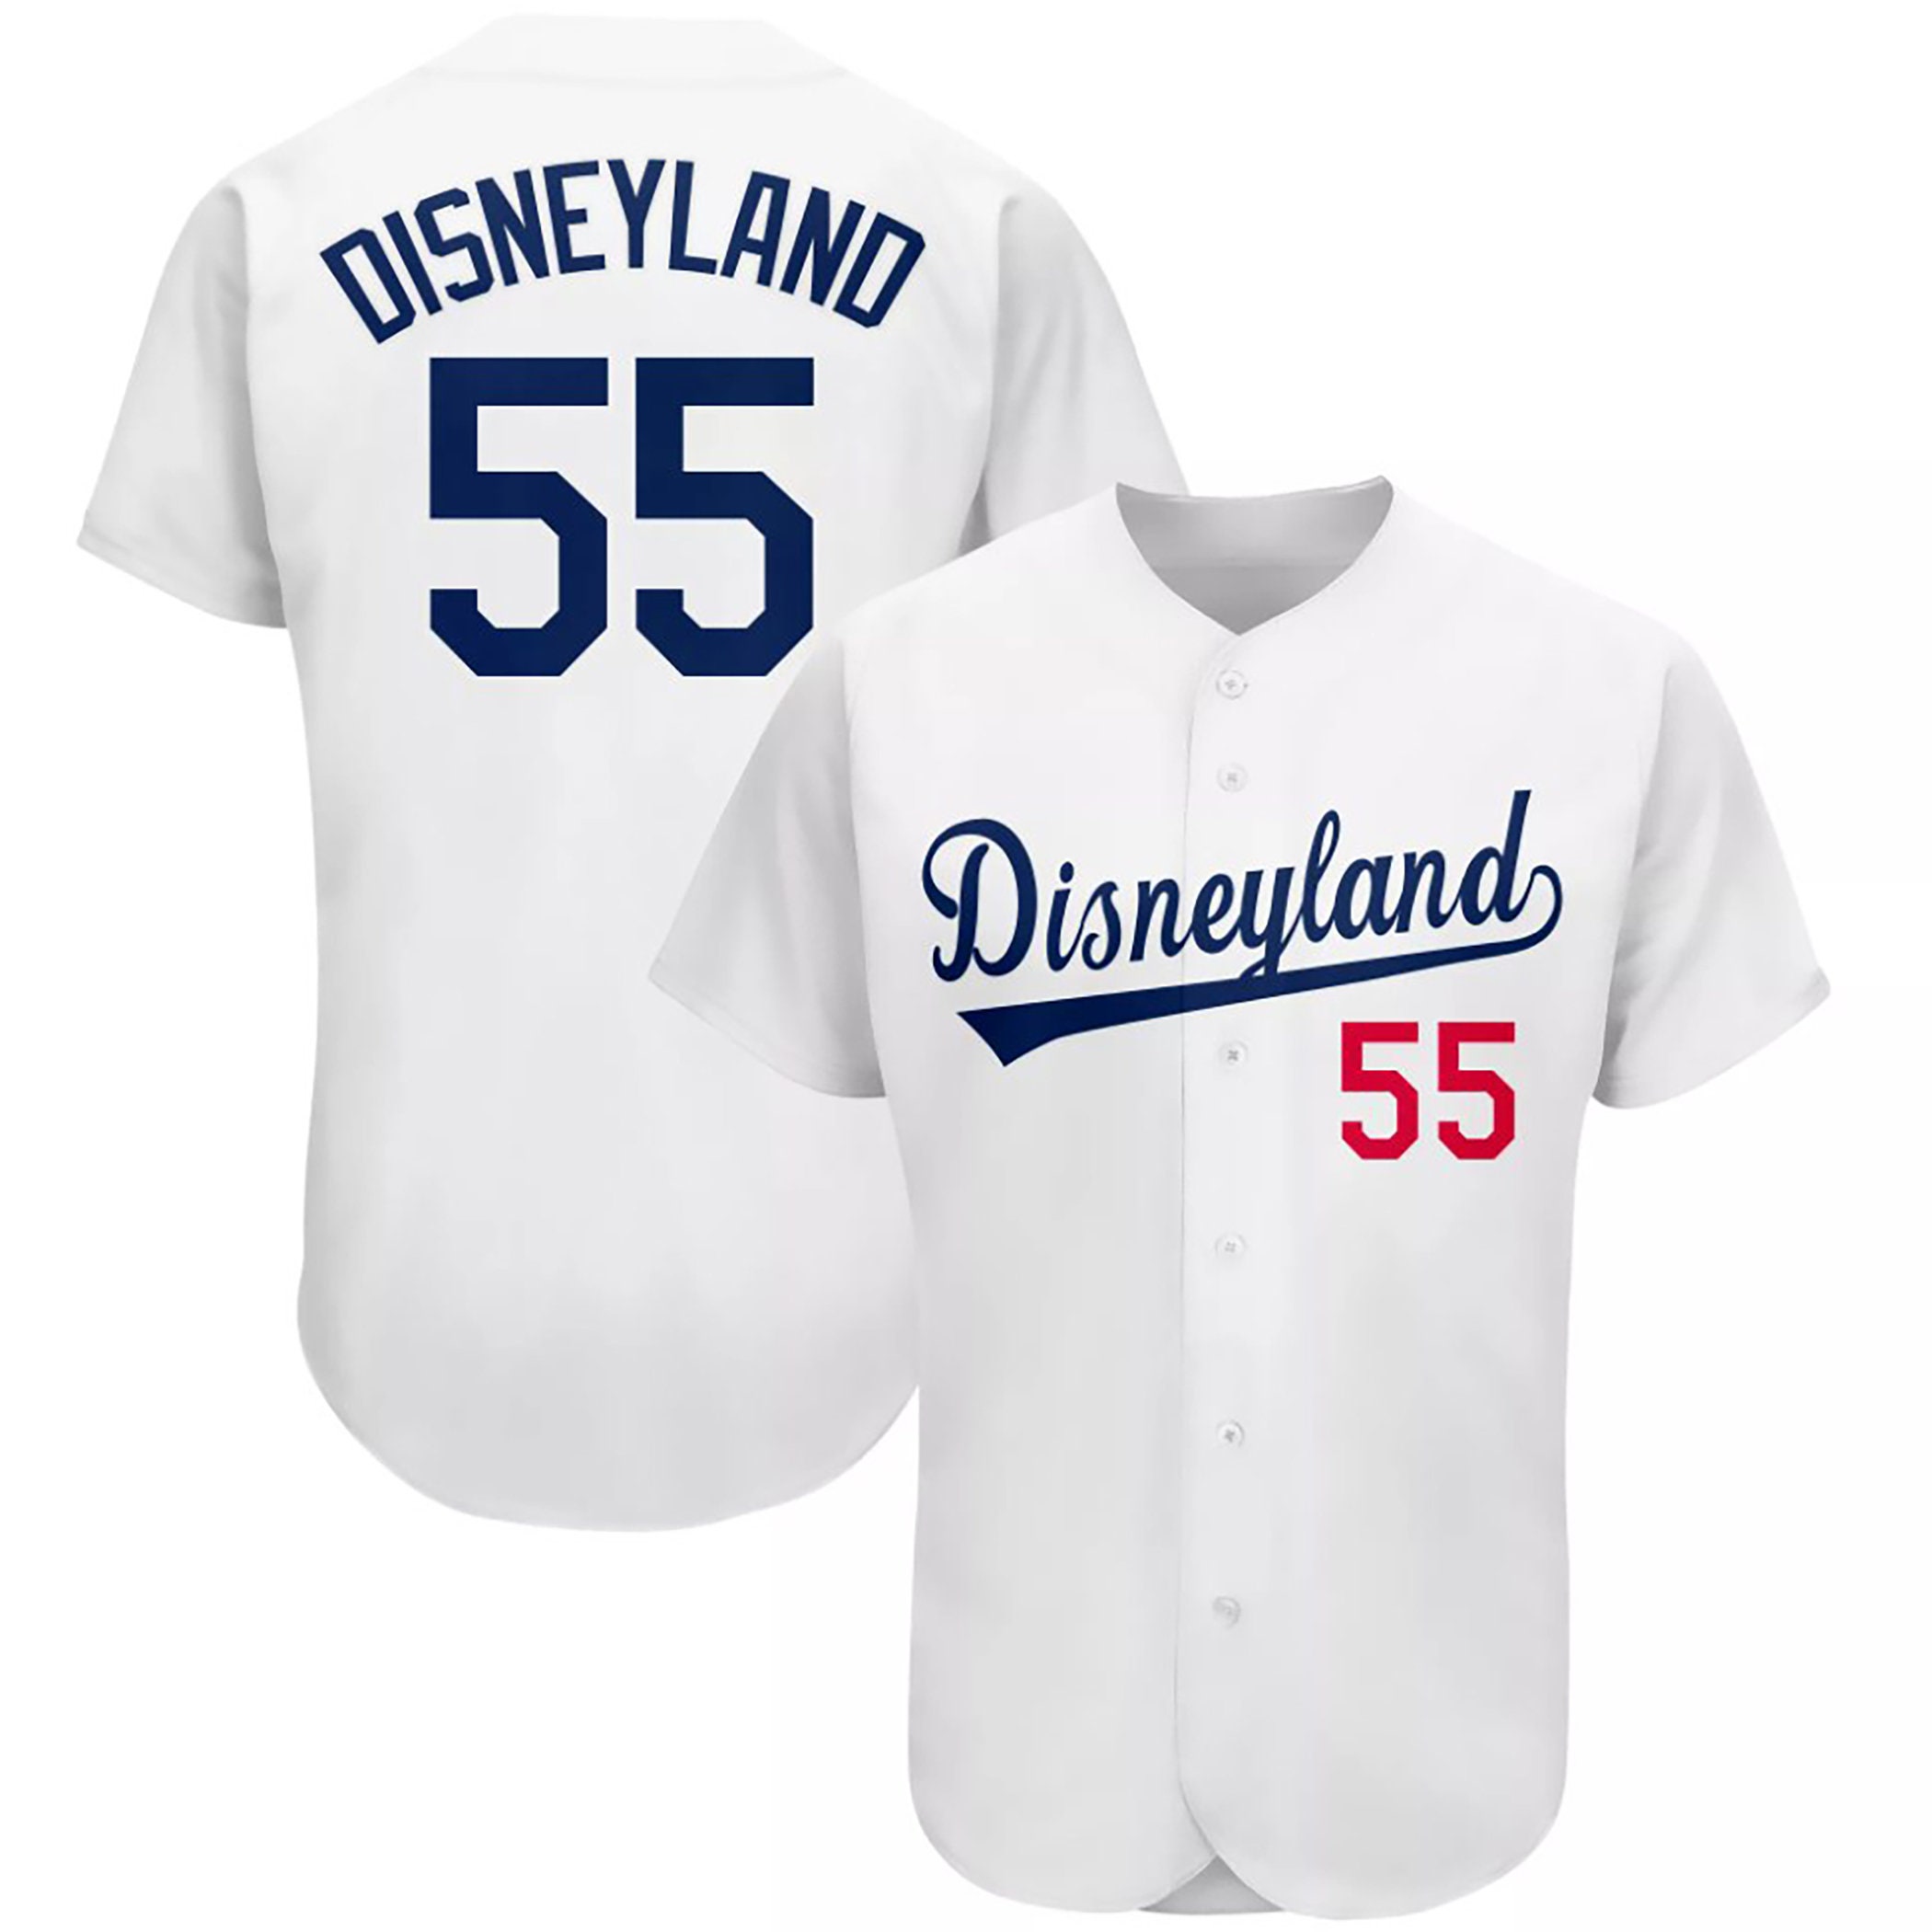 Disneyland dodgers Style Embroidered Jersey UPGRADED for 